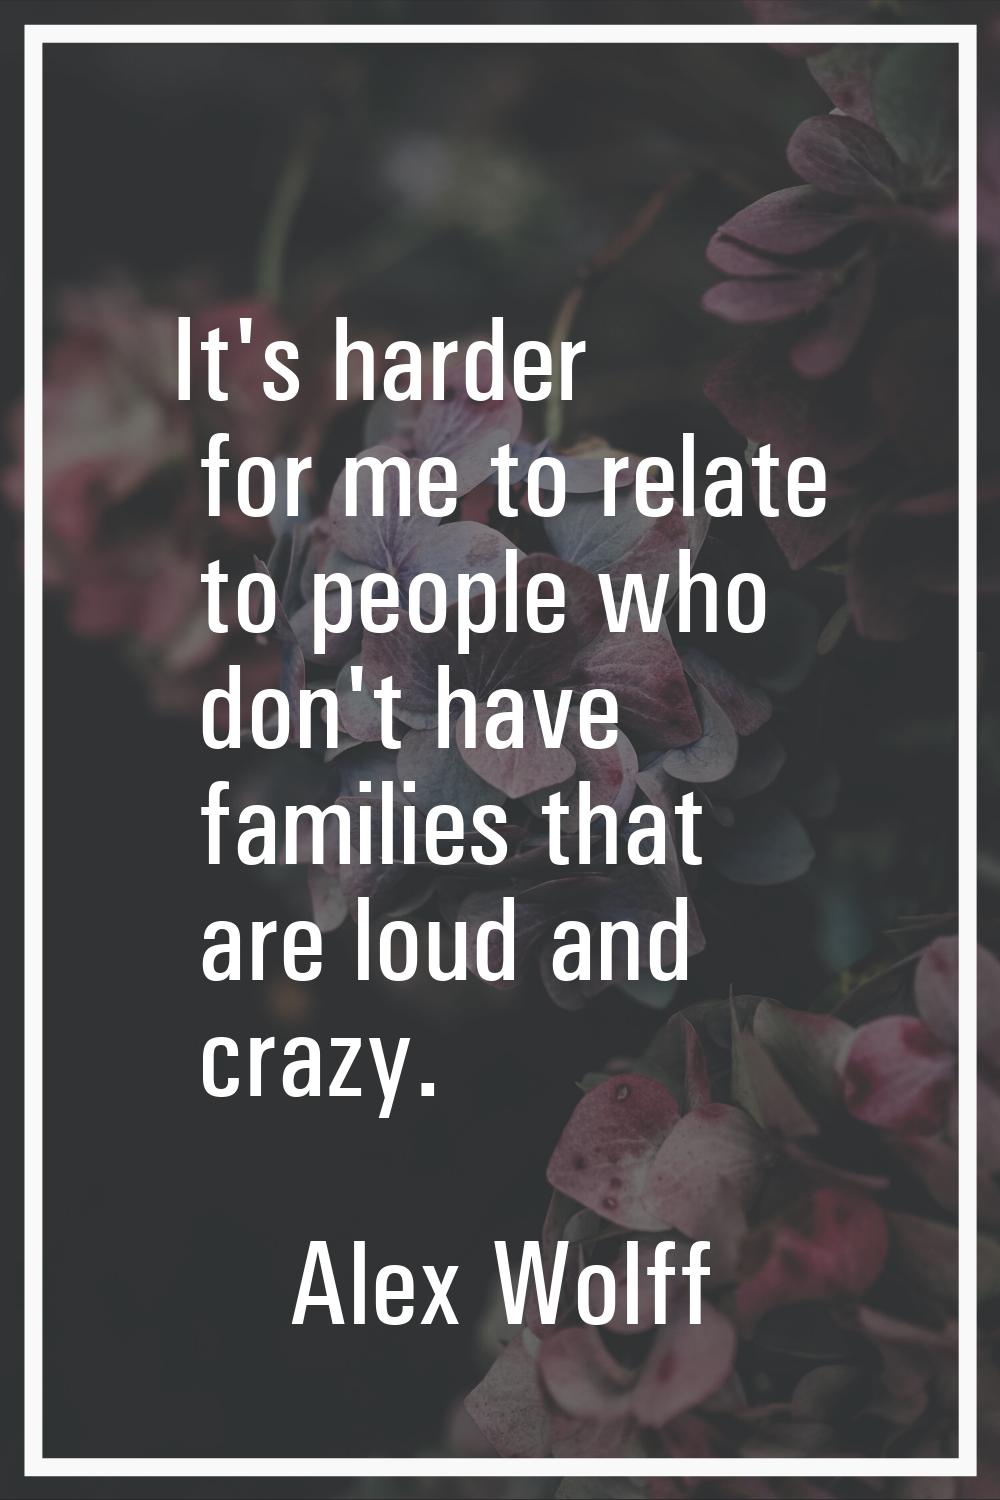 It's harder for me to relate to people who don't have families that are loud and crazy.